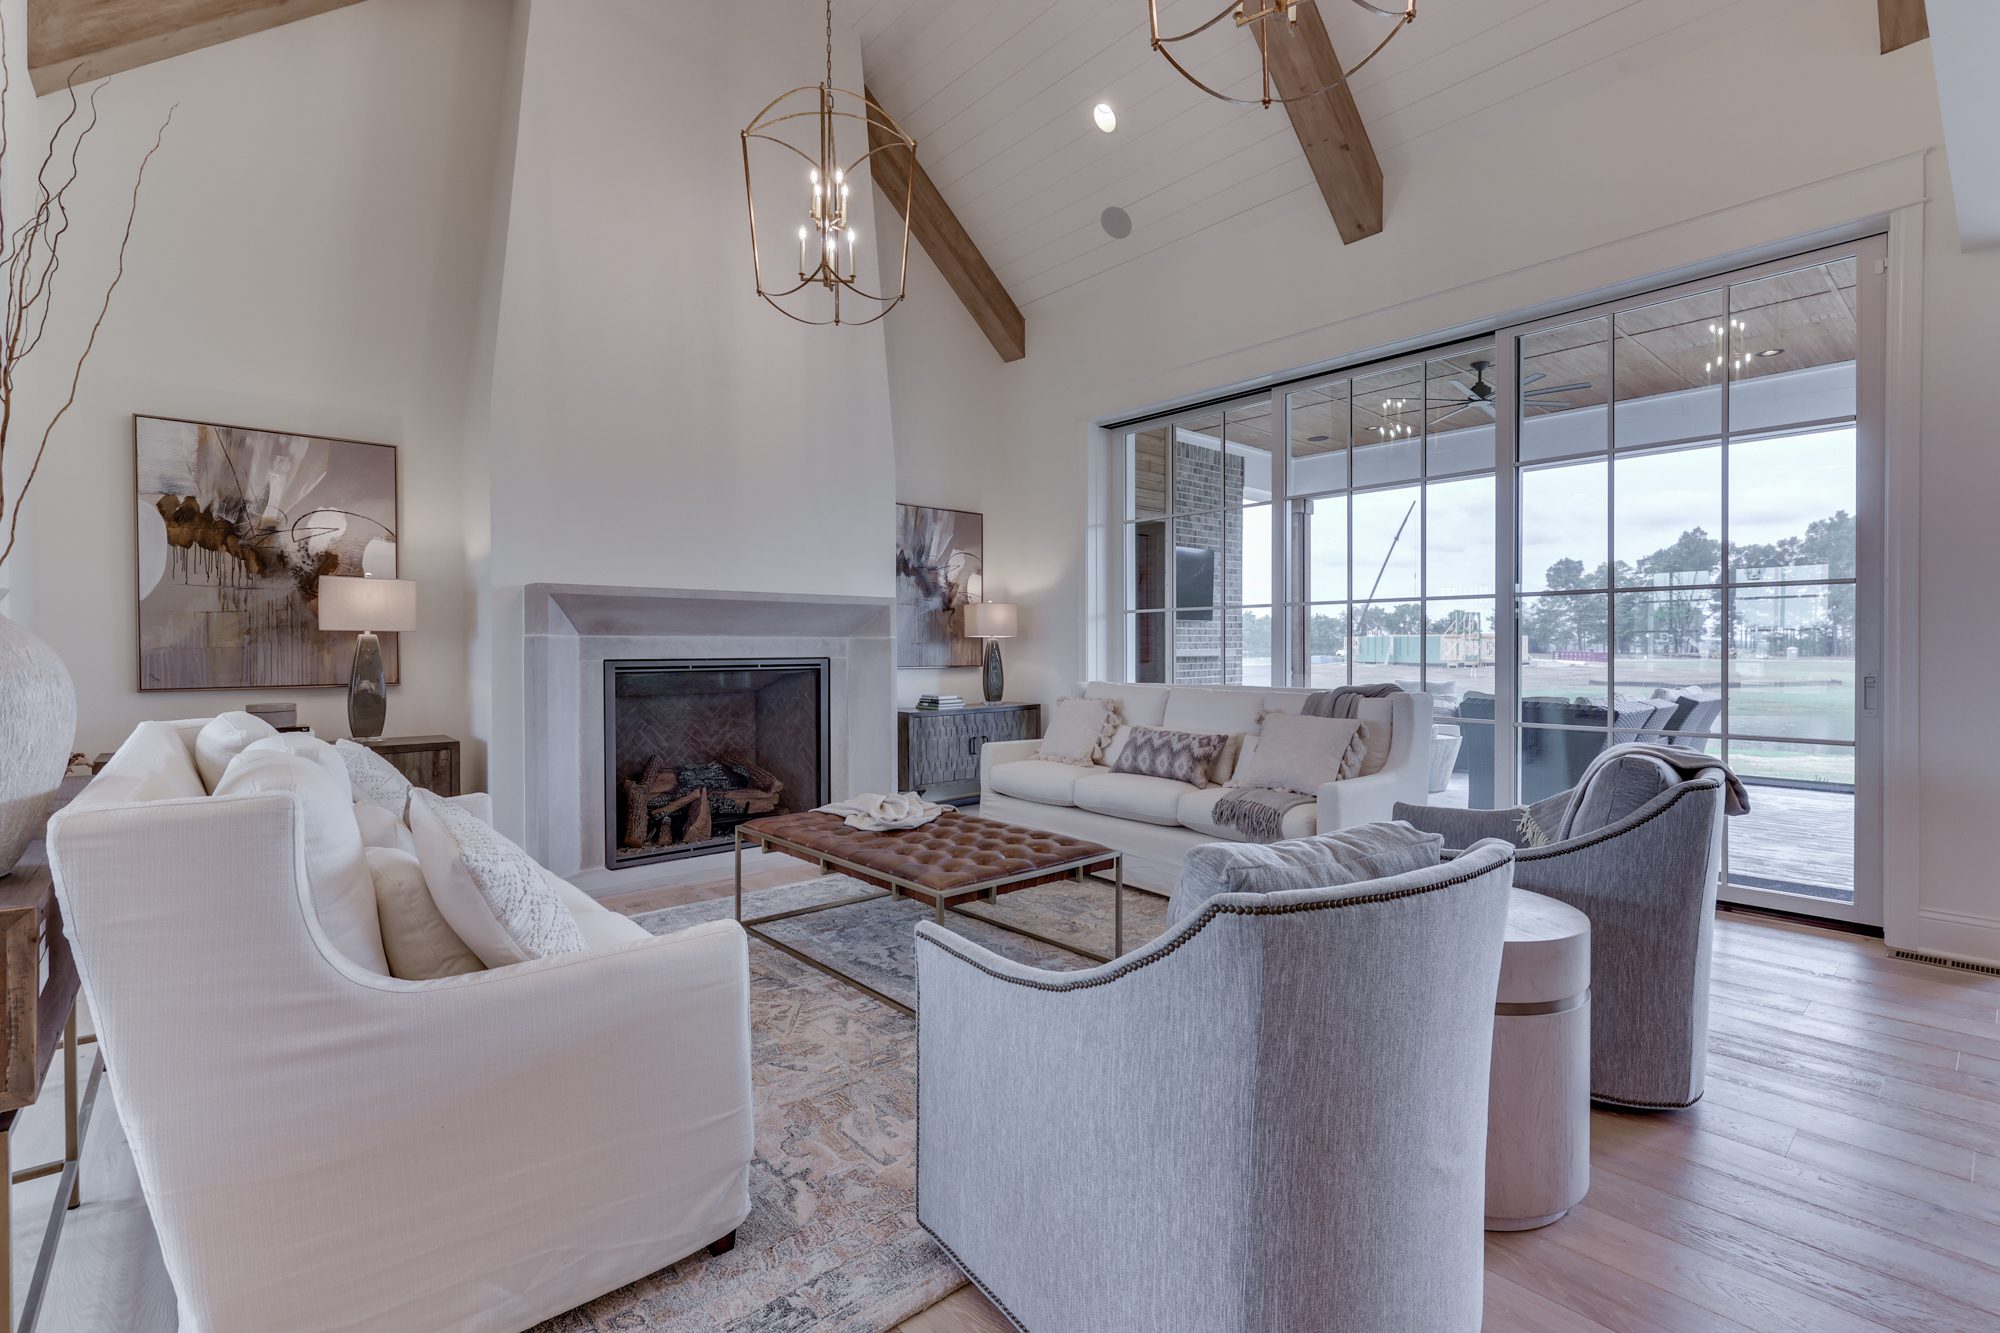 A living room with white furniture and a fireplace.